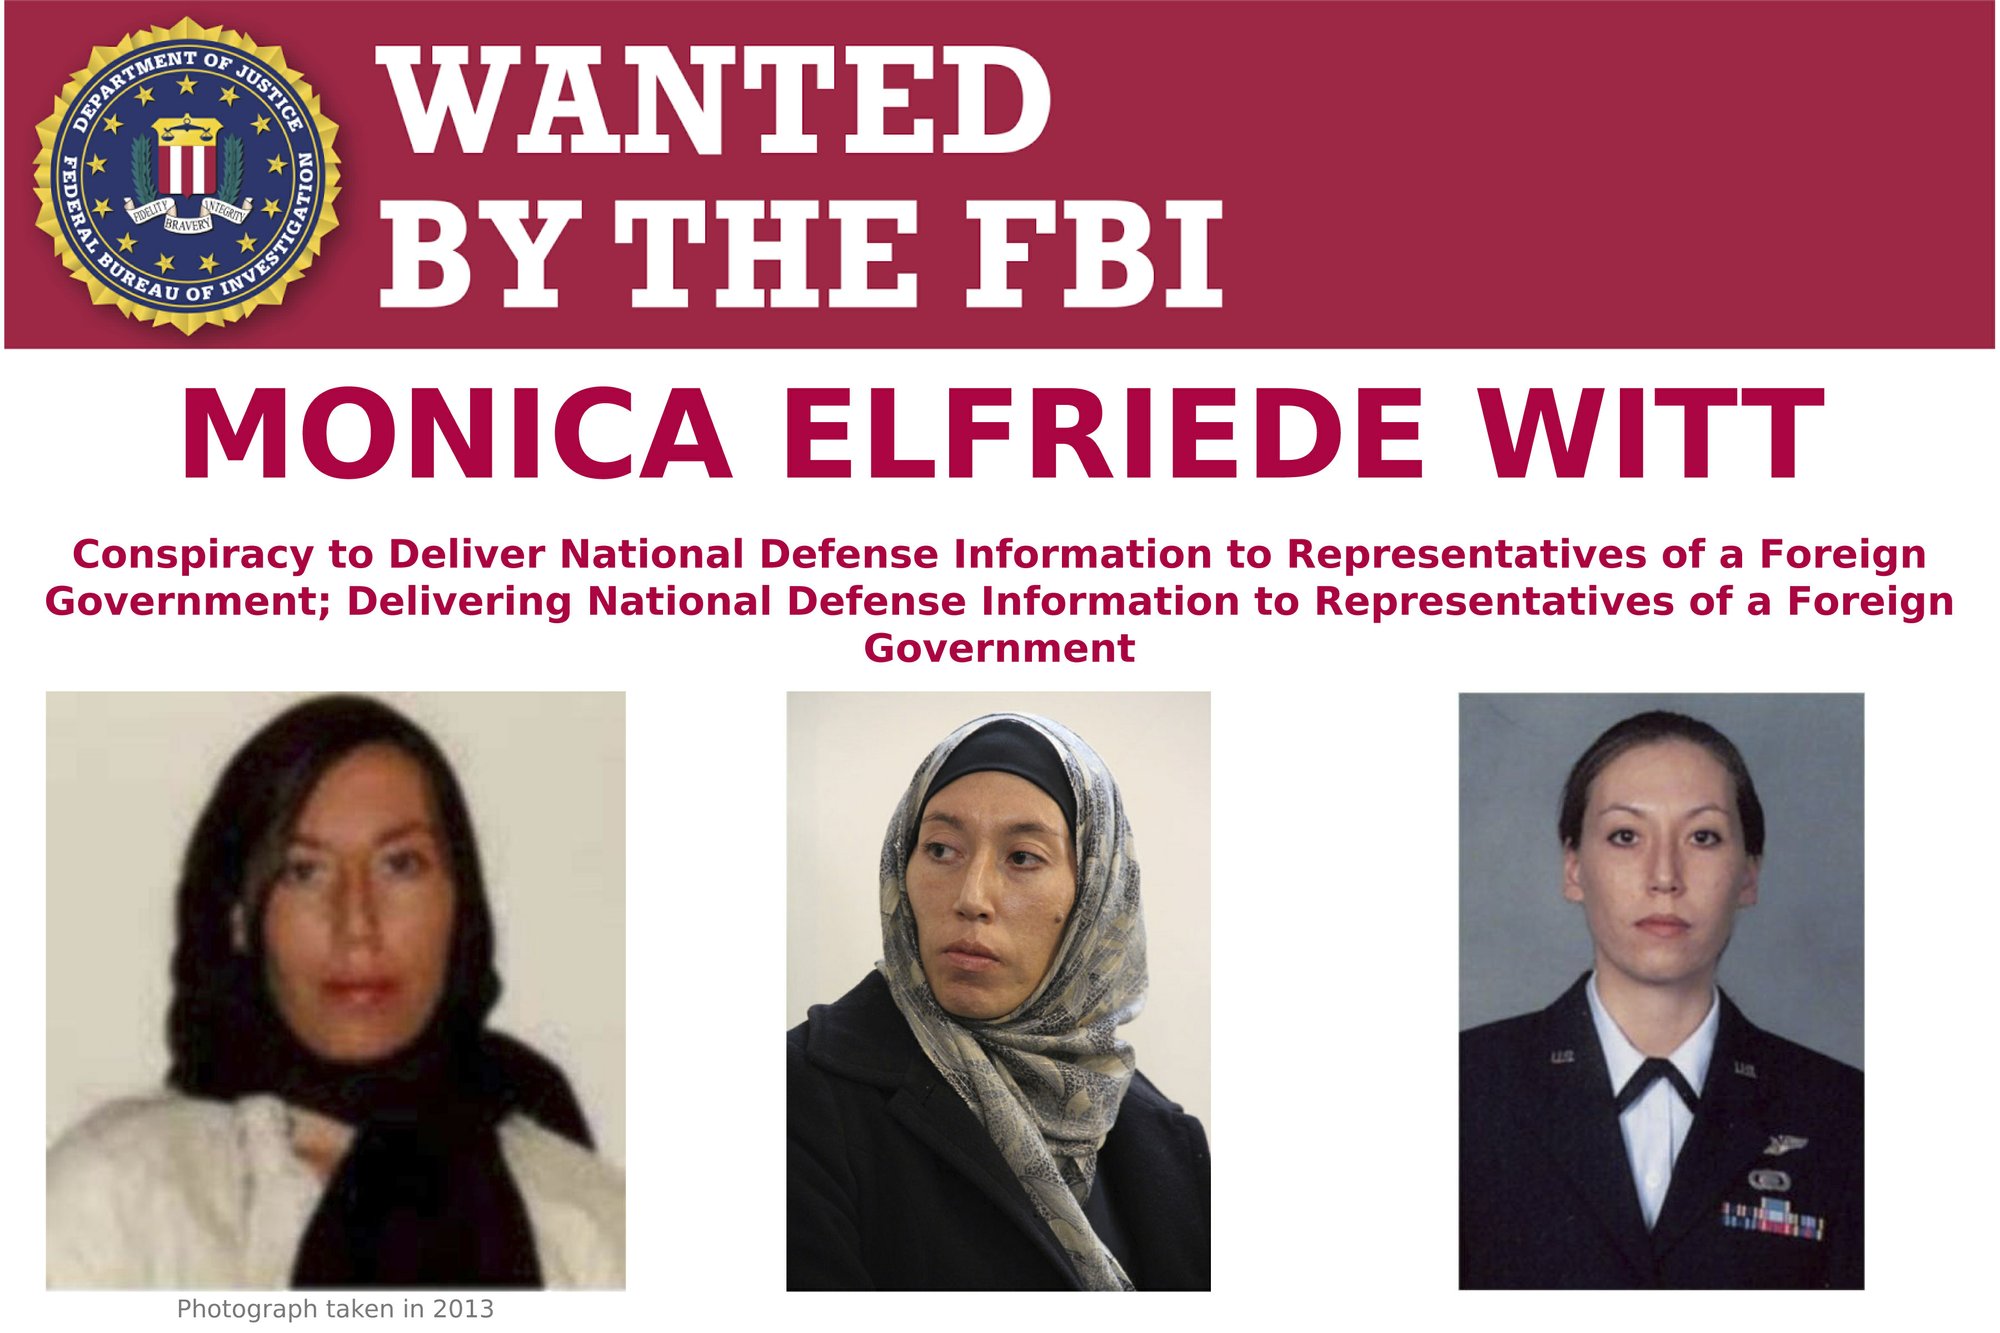 This image provided by the FBI shows part of the wanted poster for Monica Elfriede Witt. The former U.S. Air Force counterintelligence specialist who defected to Iran despite warnings from the FBI has been charged with revealing classified information to the Tehran government, including the code name and secret mission of a Pentagon program, prosecutors said Wednesday, Feb. 13, 2019. (FBI via AP)